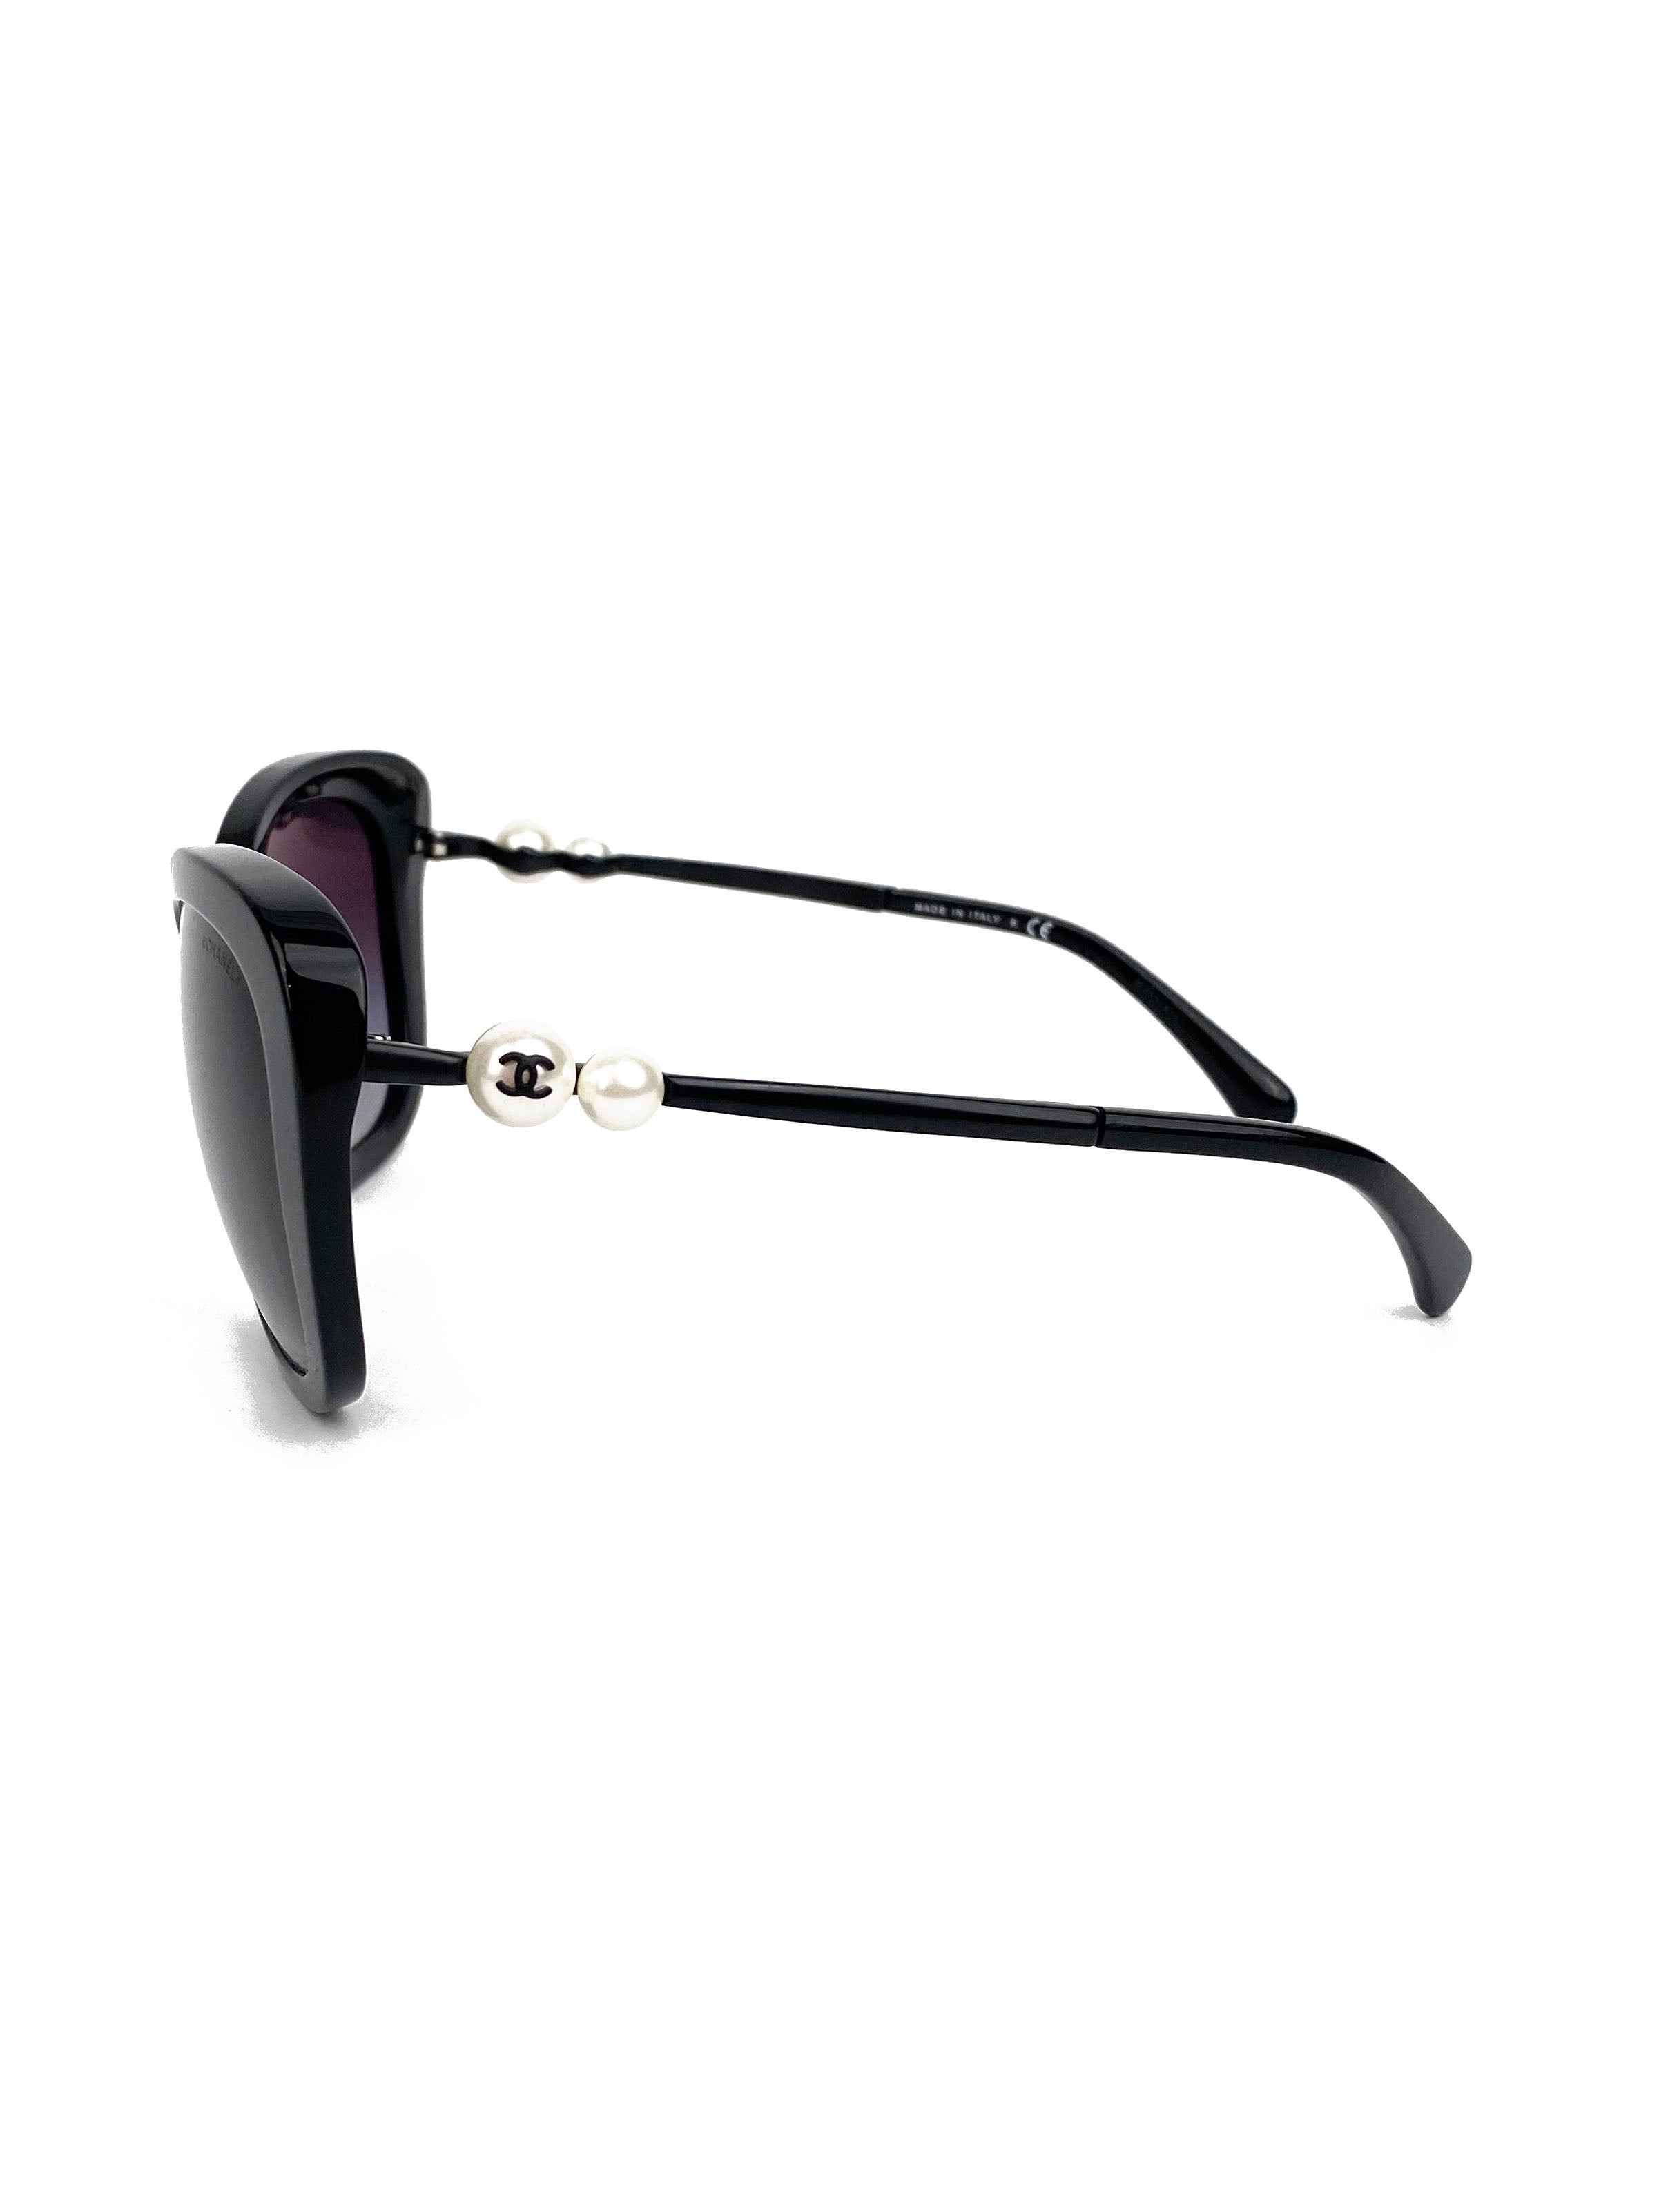 Chanel Black Butterfly Sunglasses with Imitation Pearls 5339H